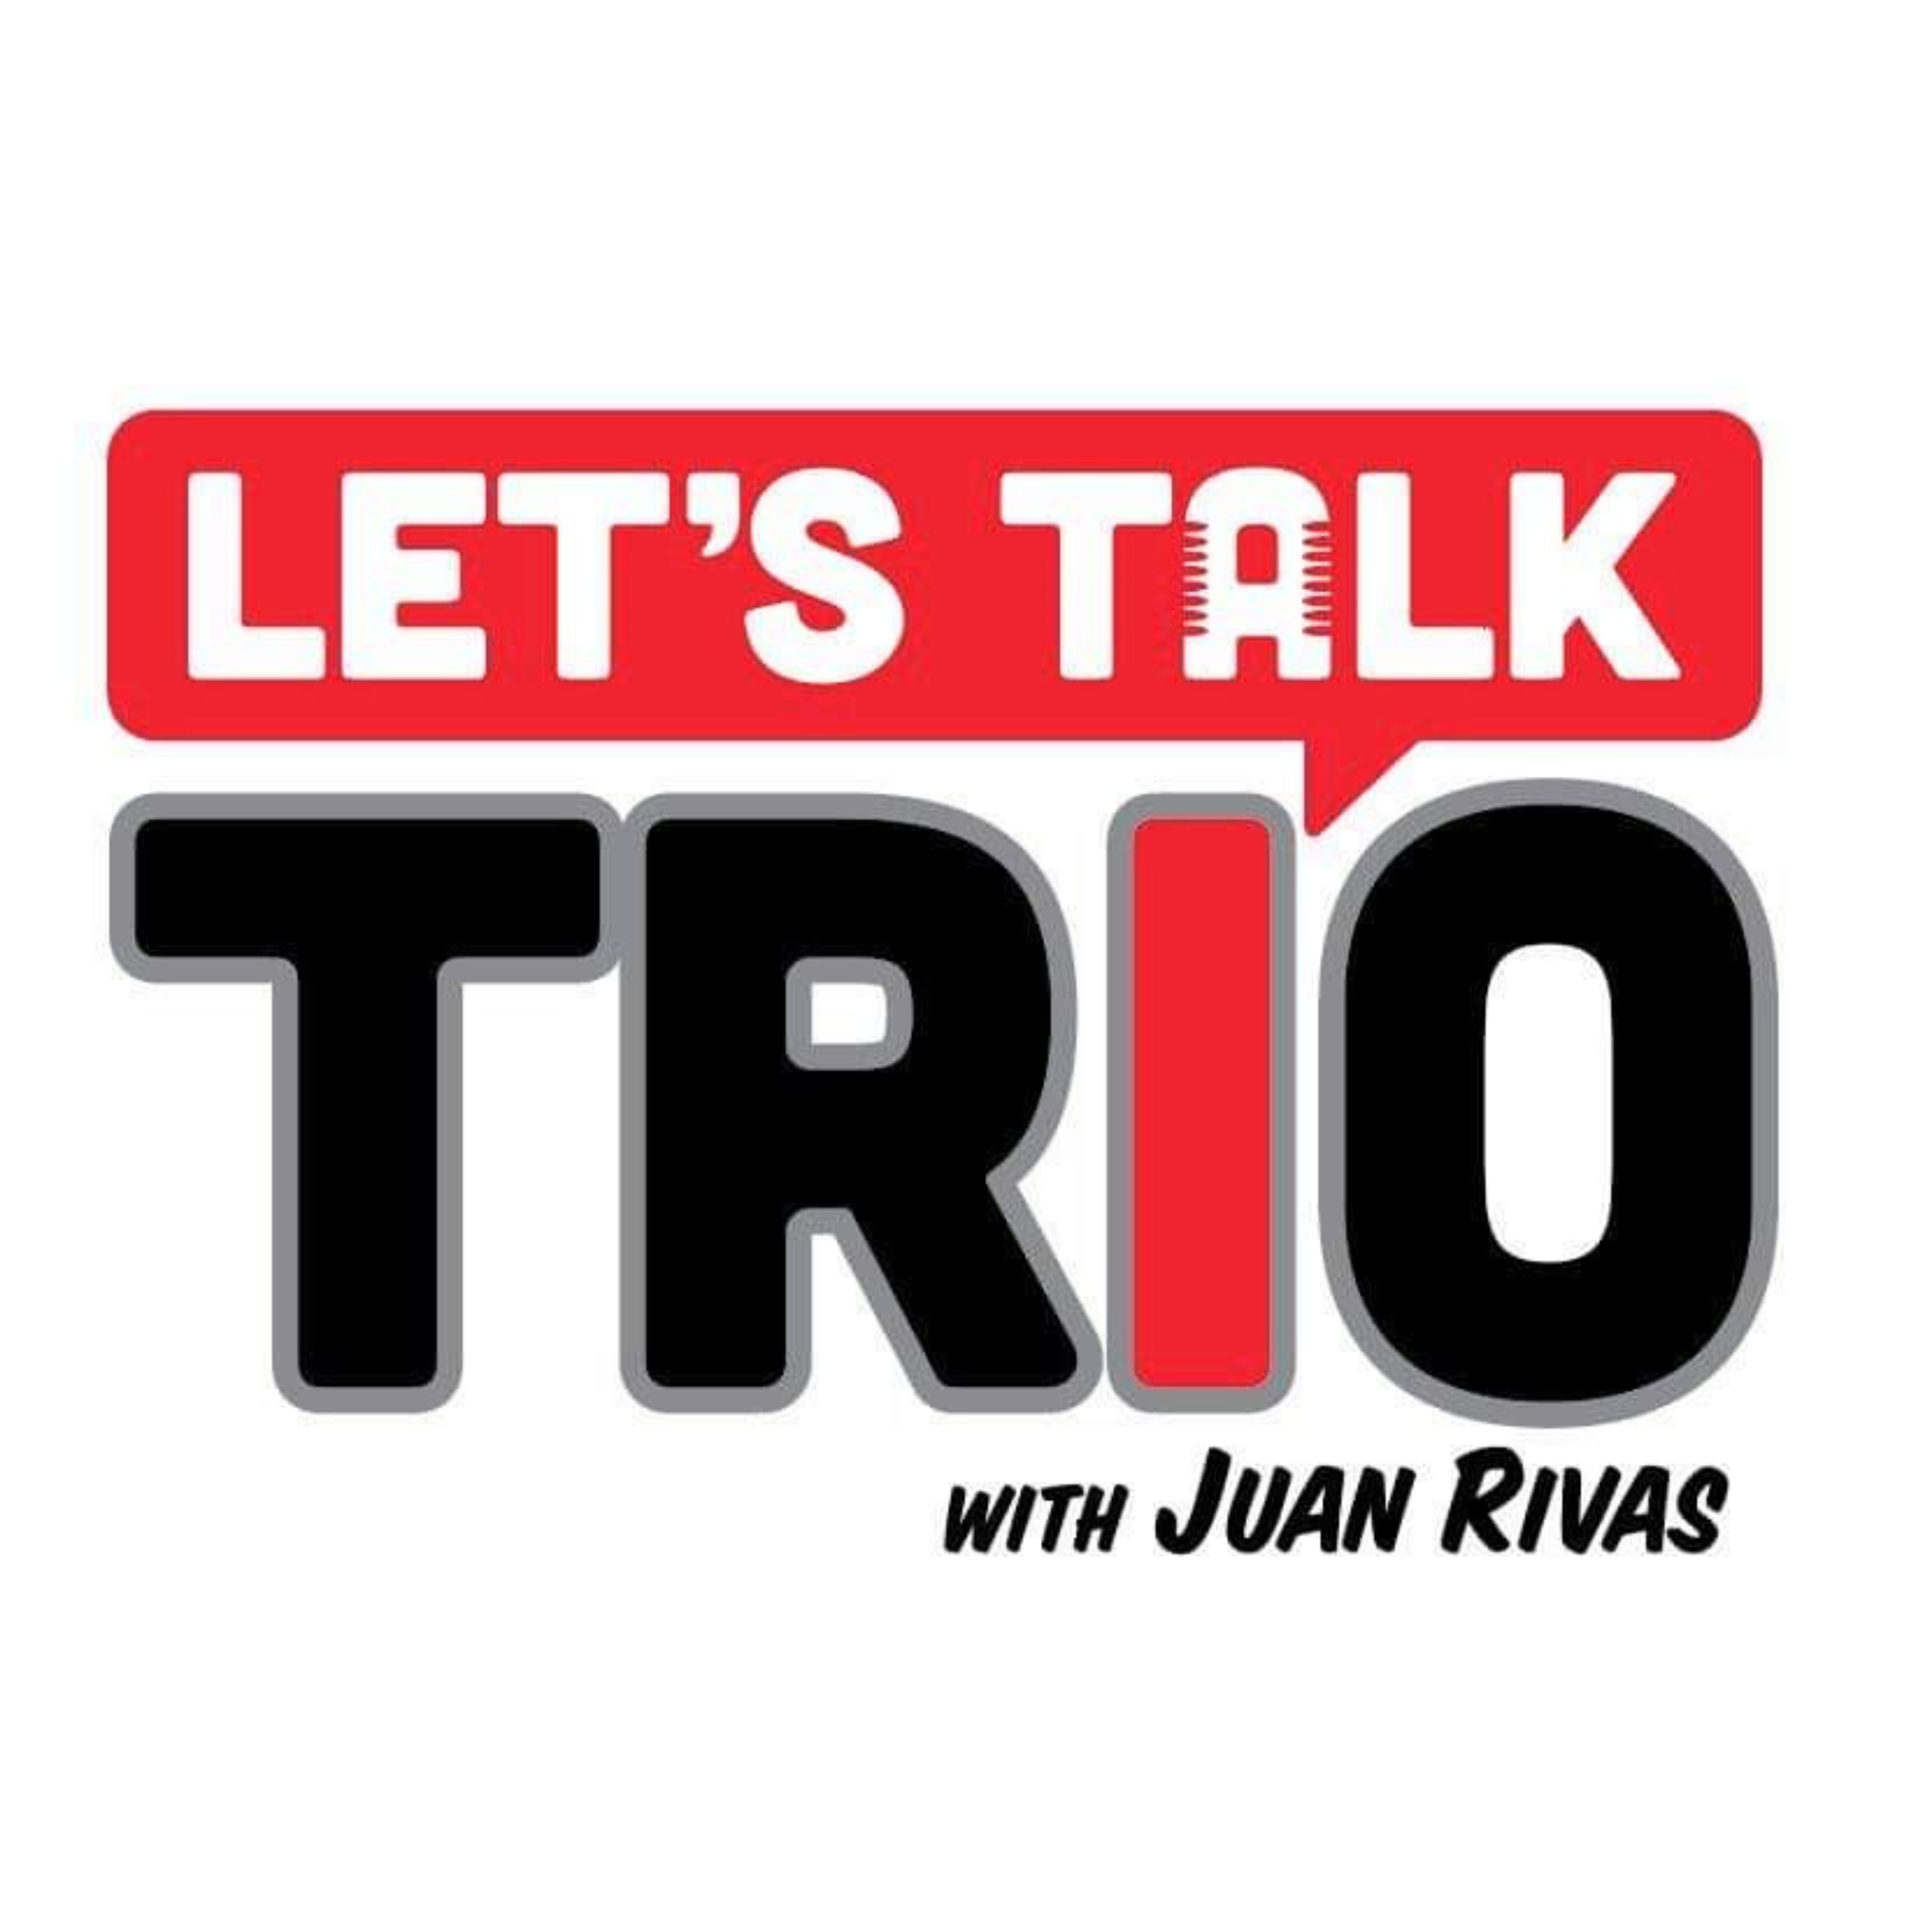 The Let’s Talk TRIO Podcast Publishes its 70th Episode!